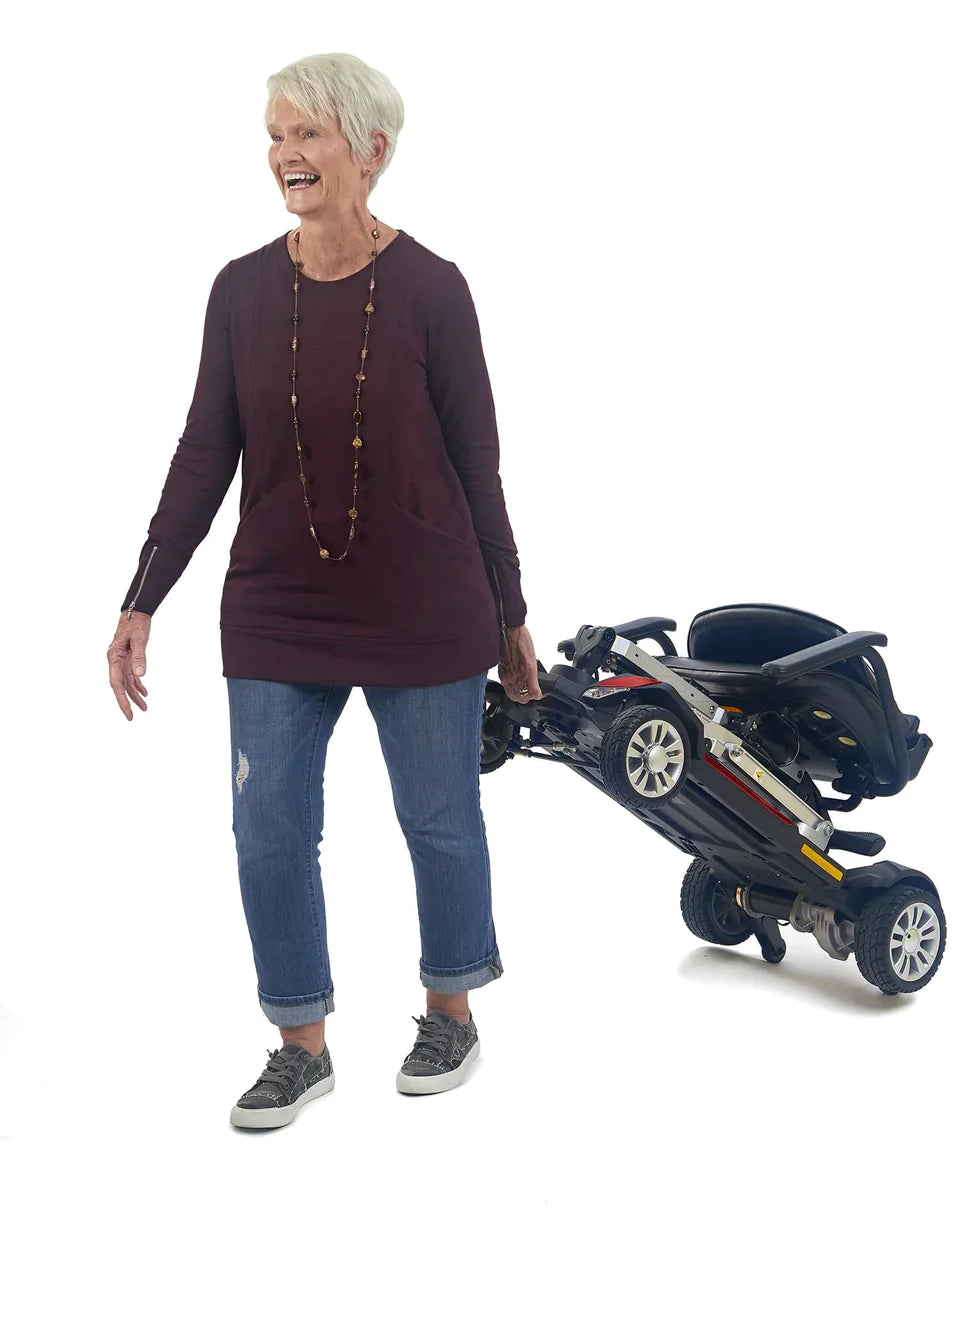 Golden Technologies Buzzaround Carry-On GB120 Scooter - Airline Approved